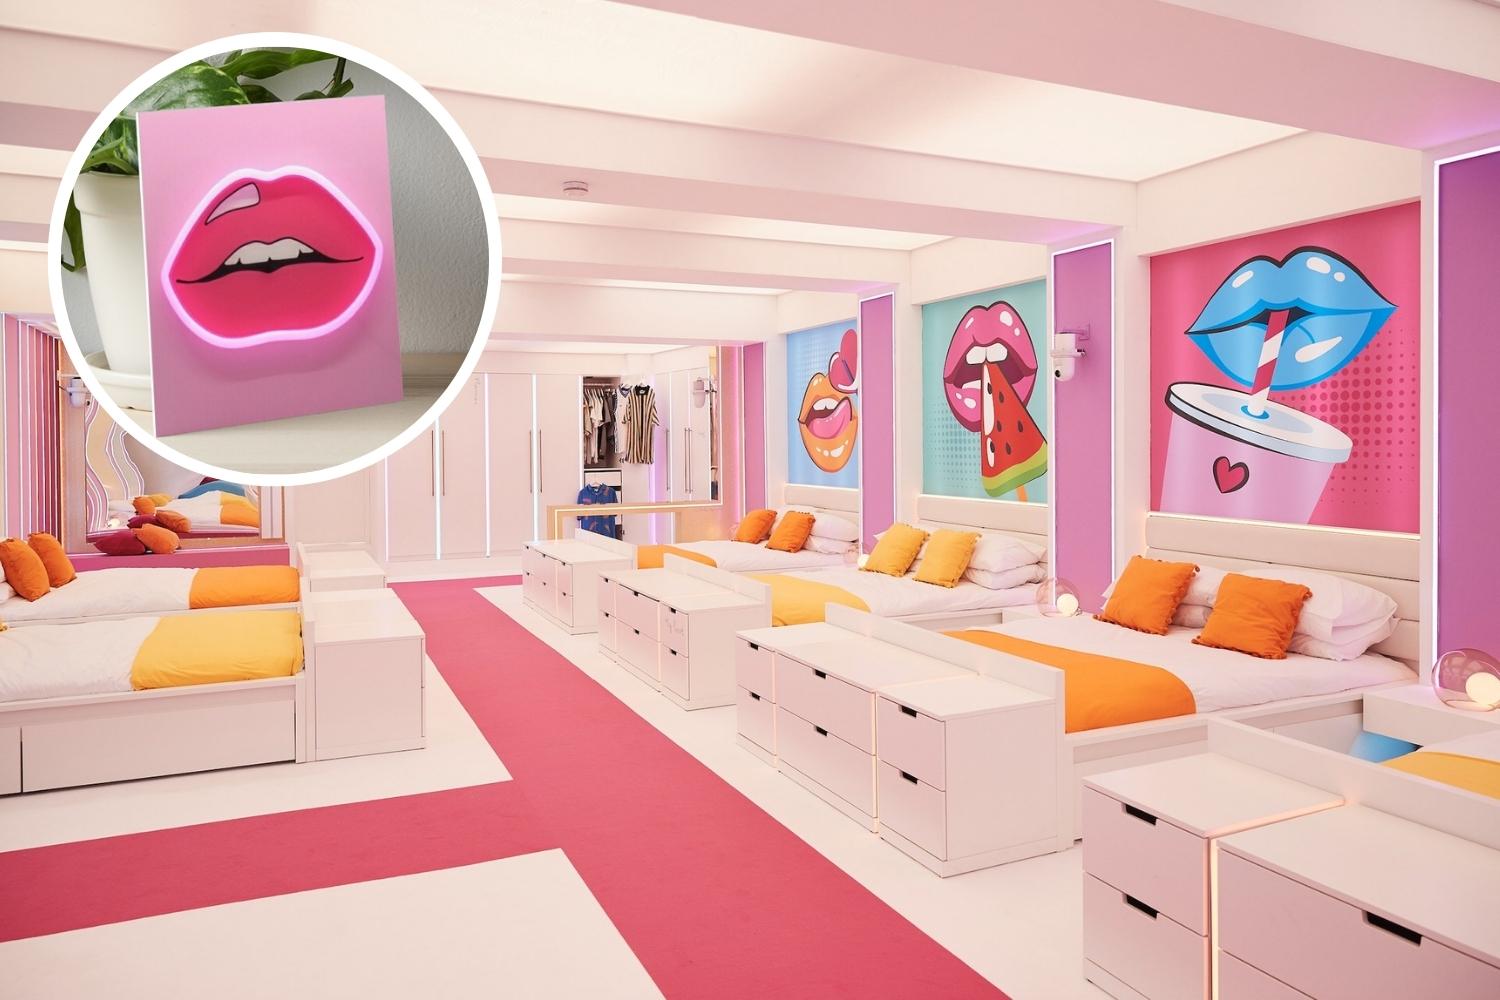 If there’s one thing the Love Island interior designers can’t resist, it’s an in-your-face colour palette. Neon cushions and bean bags inject a playful mood to the villa’s outdoor areas, and our top picks from Amazon come in a variety of shades from classic hot pink to tropical aqua – great for recreating the holiday feel without splashing the cash on a hotel!